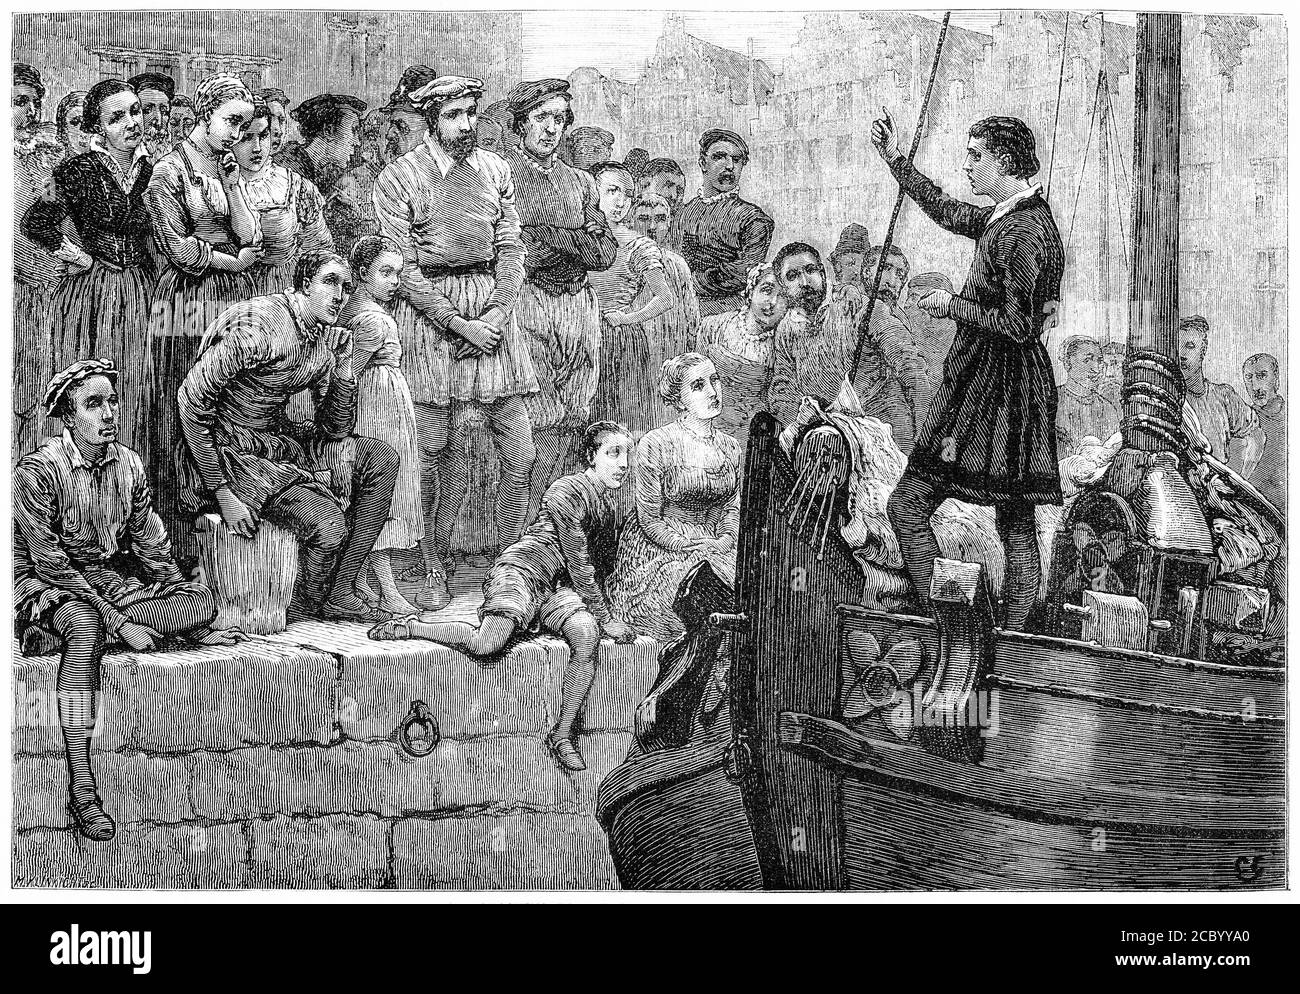 Engraving of Nicholas preaching to the crowd from a boat on the Scheldt, from 'The History of Protestantism' by James Aitken Wylie (1808-1890), pub. 1878 Stock Photo